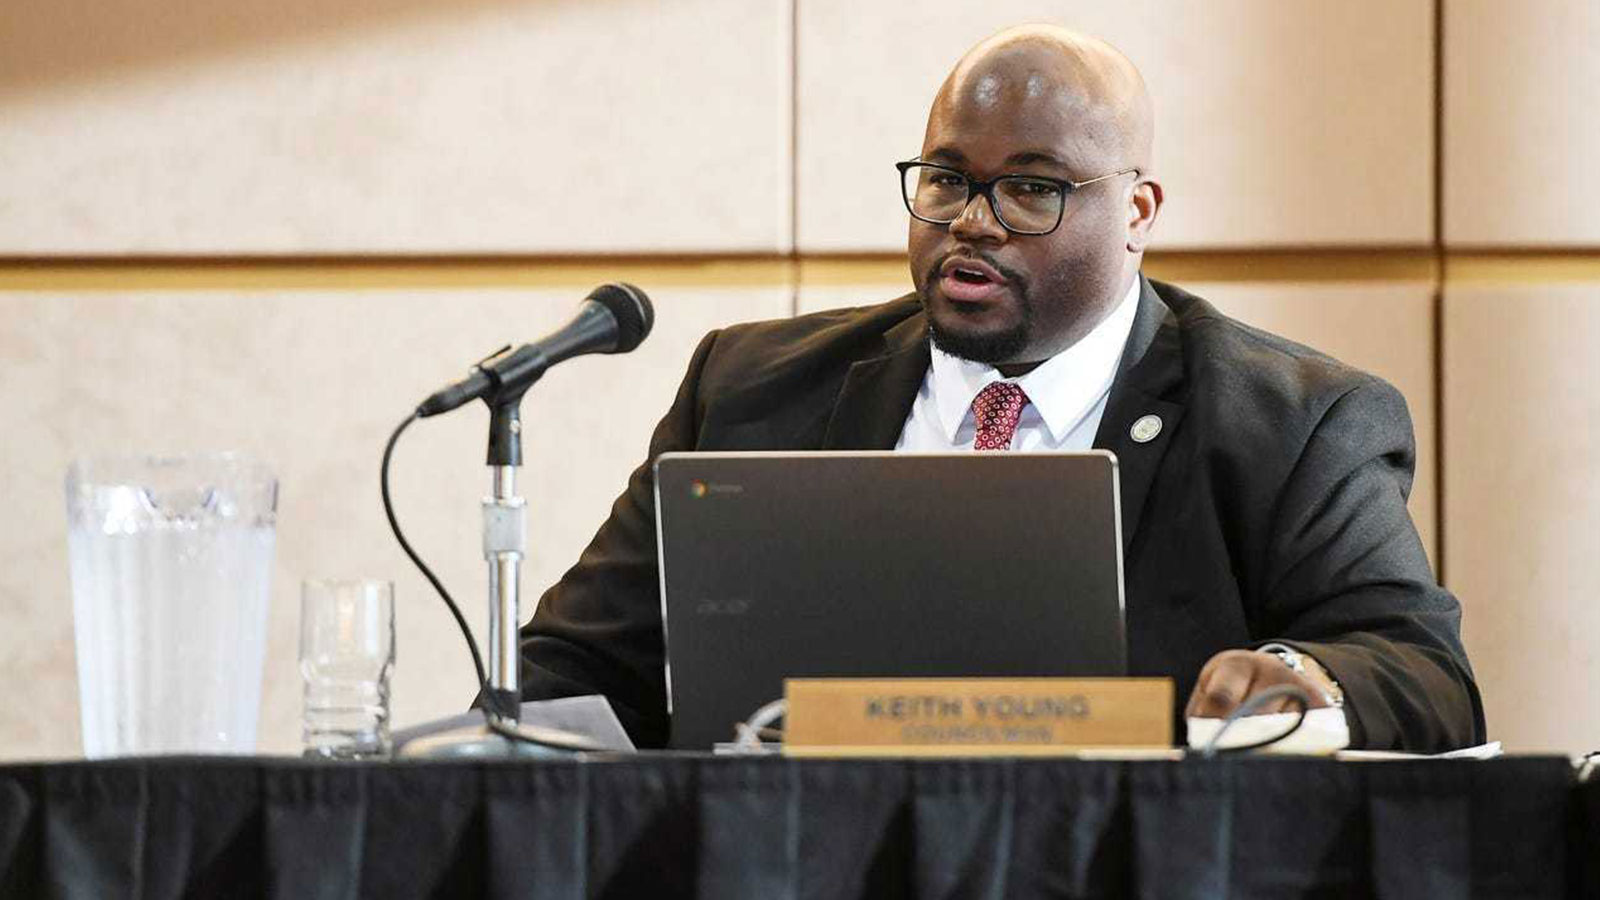 Asheville reparations architect Keith Young criticizes city’s $366,000 outside contract